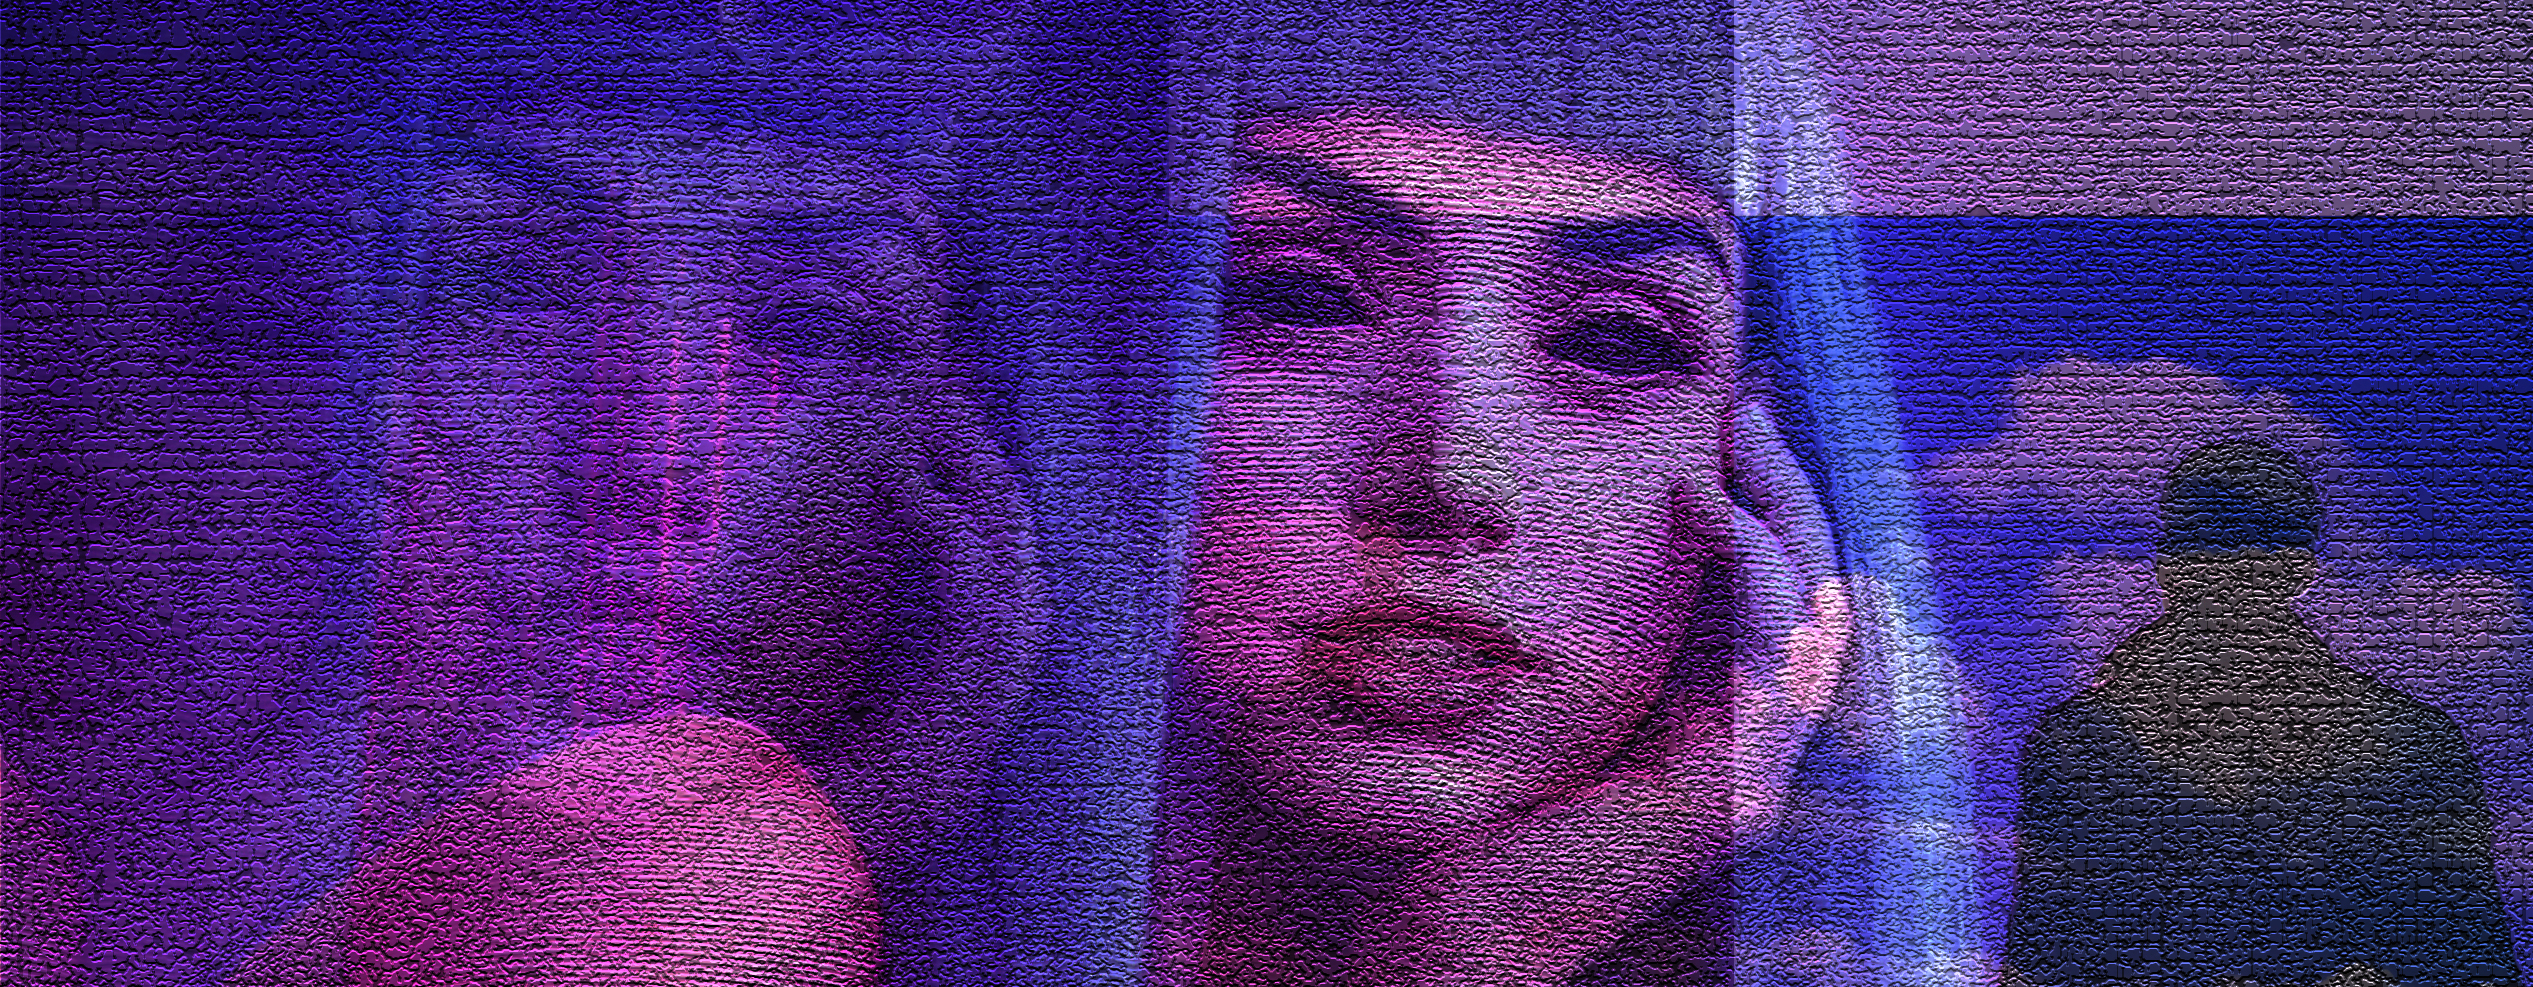 General 2533x987 Blade Runner 2049 Ana de Armas neon cyber hand on face parted lips long hair blue hair looking at viewer glitch art women actress movies movie characters digital art